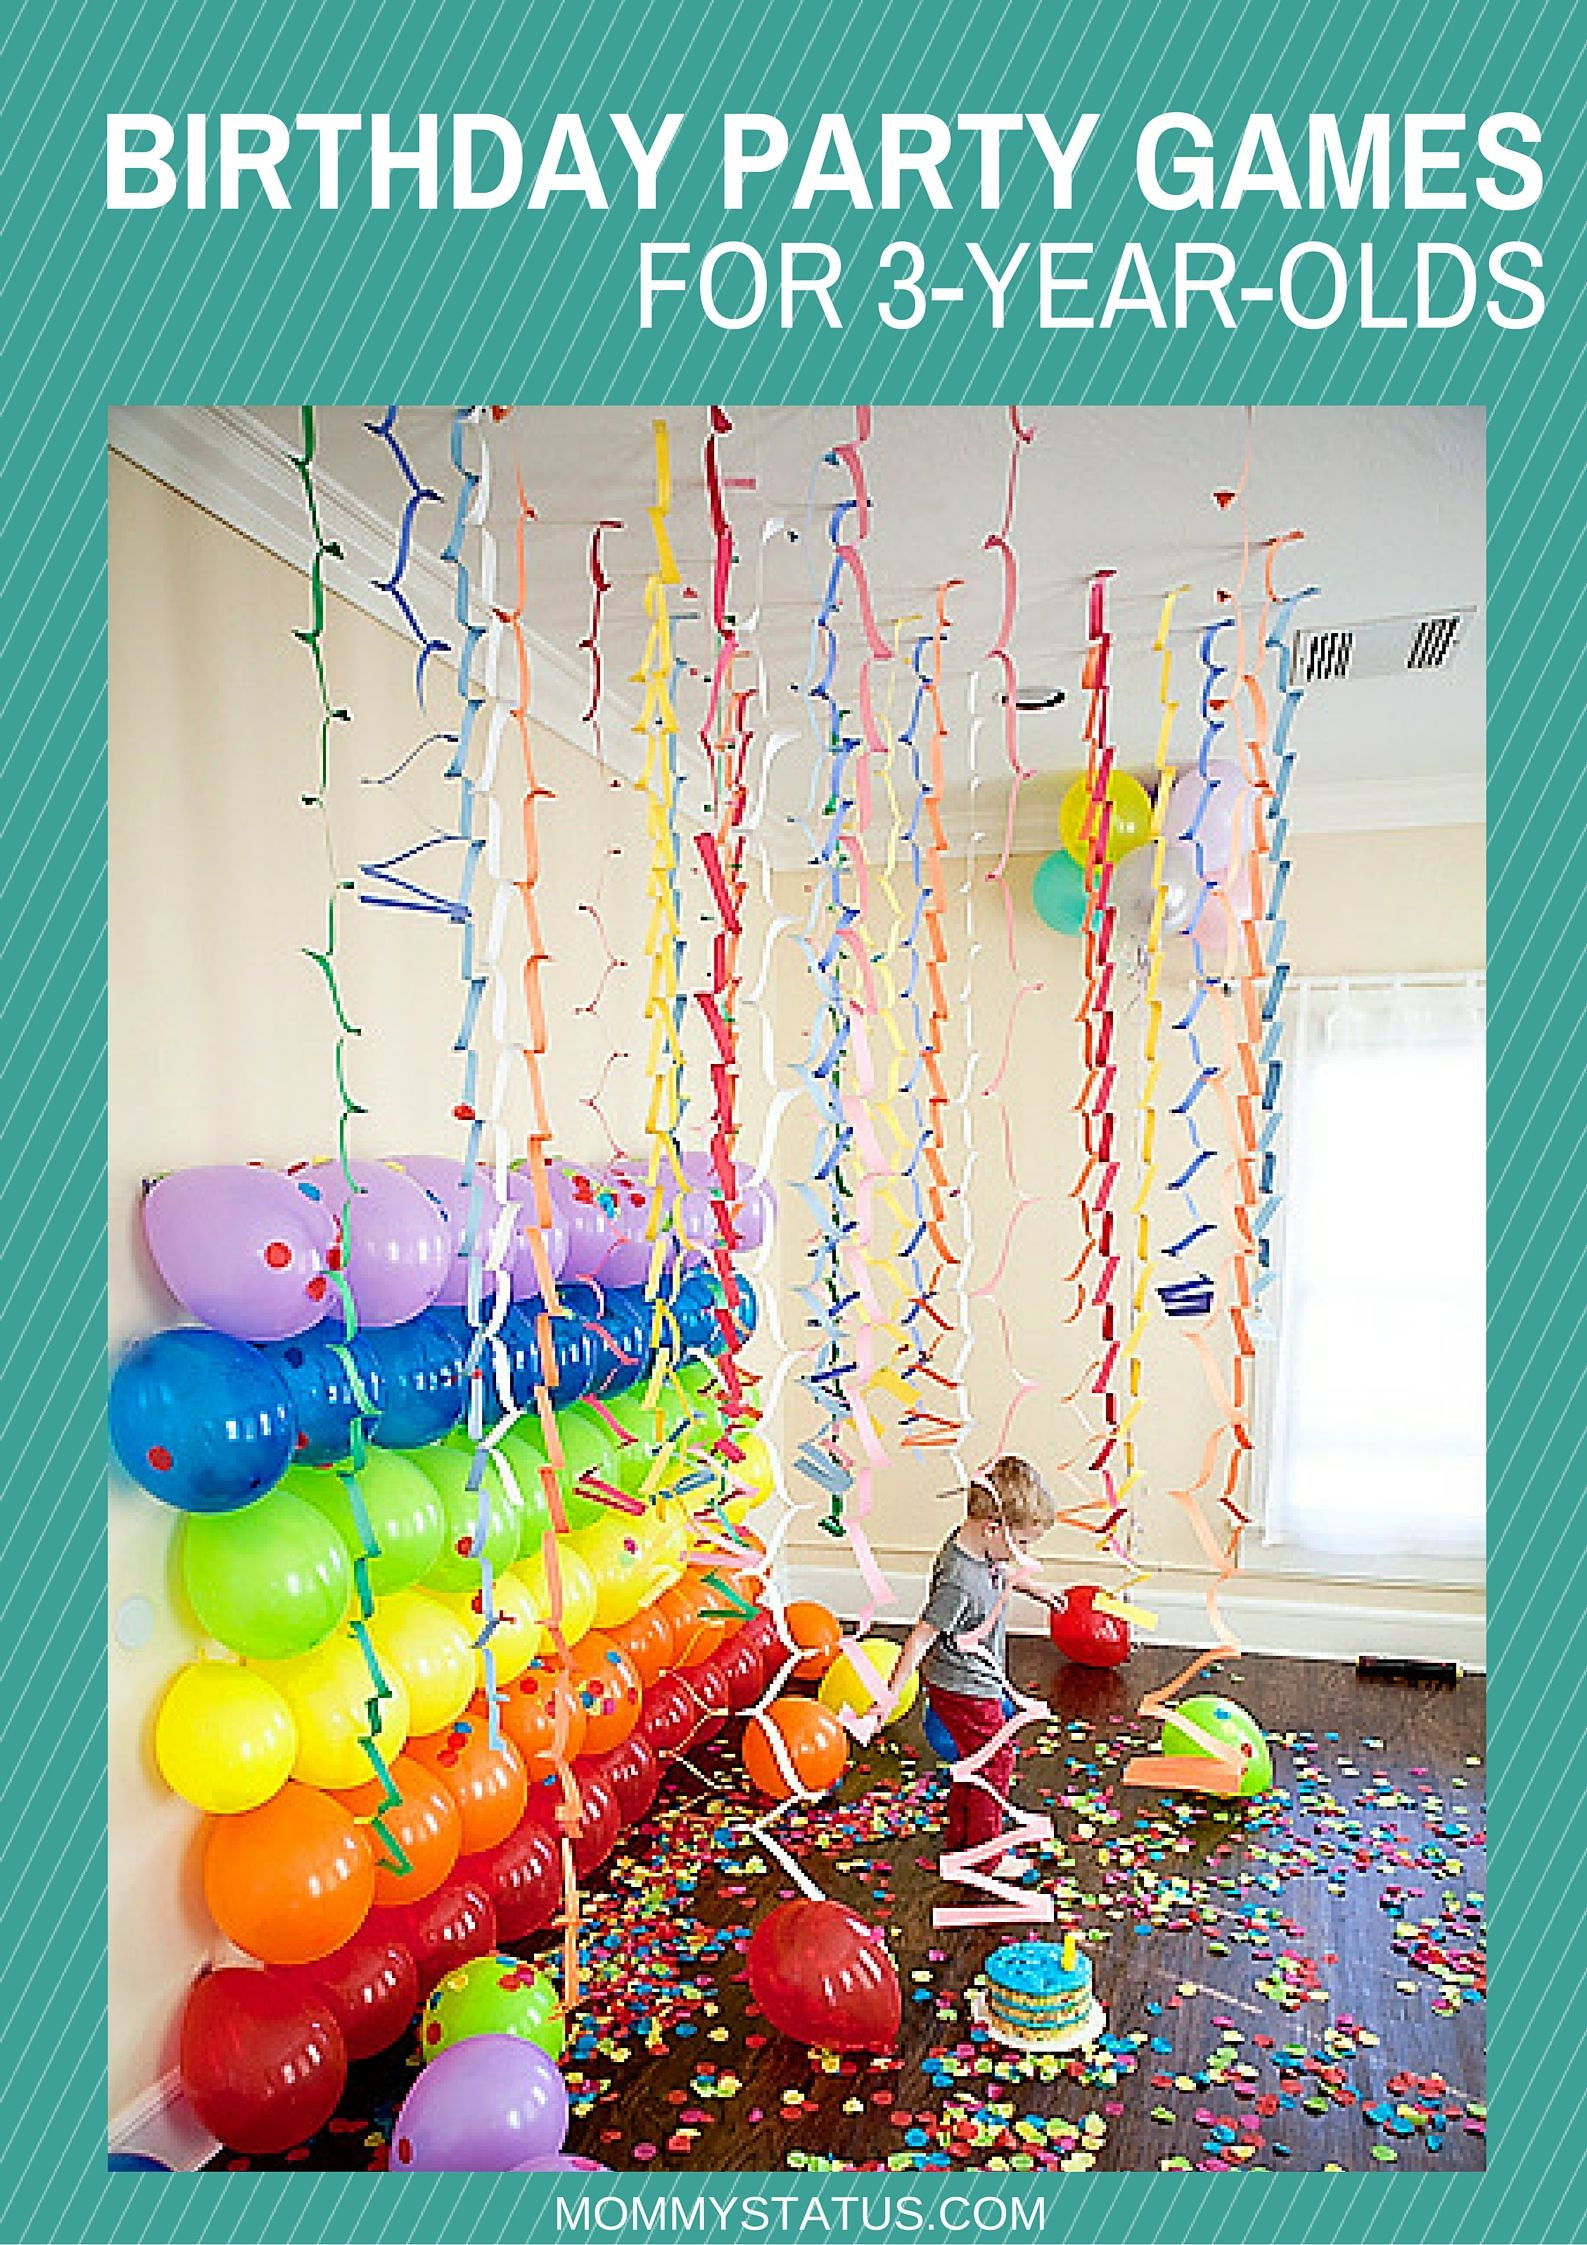 Birthday Party Ideas For 2 Year Old
 BIRTHDAY PARTY GAMES FOR 3 YEAR OLDS